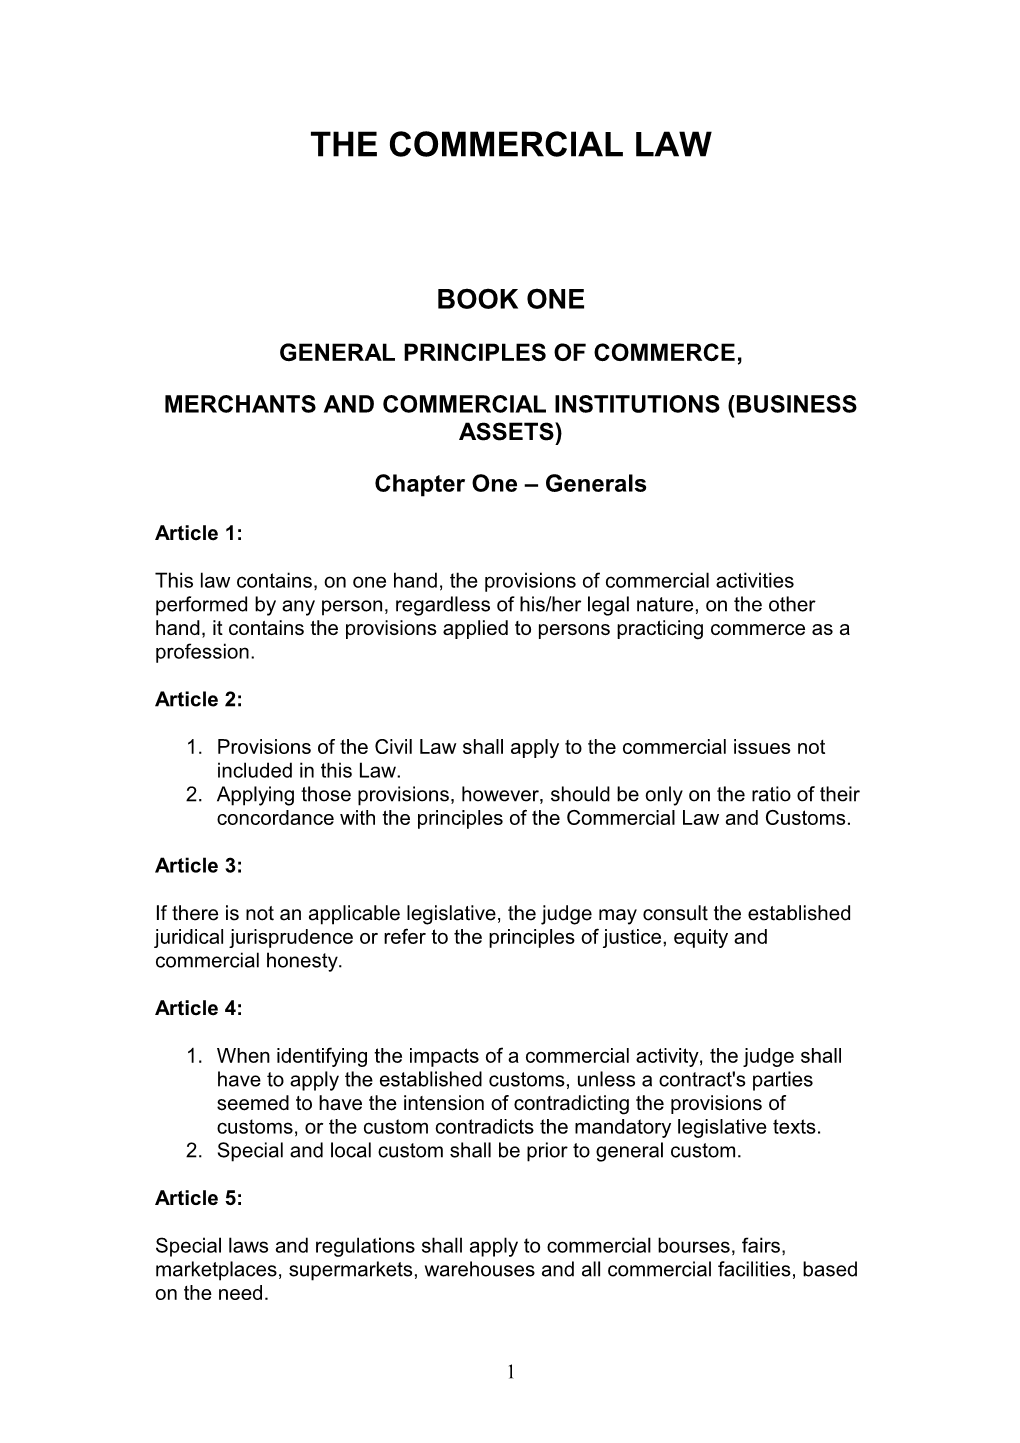 The Commercial Law